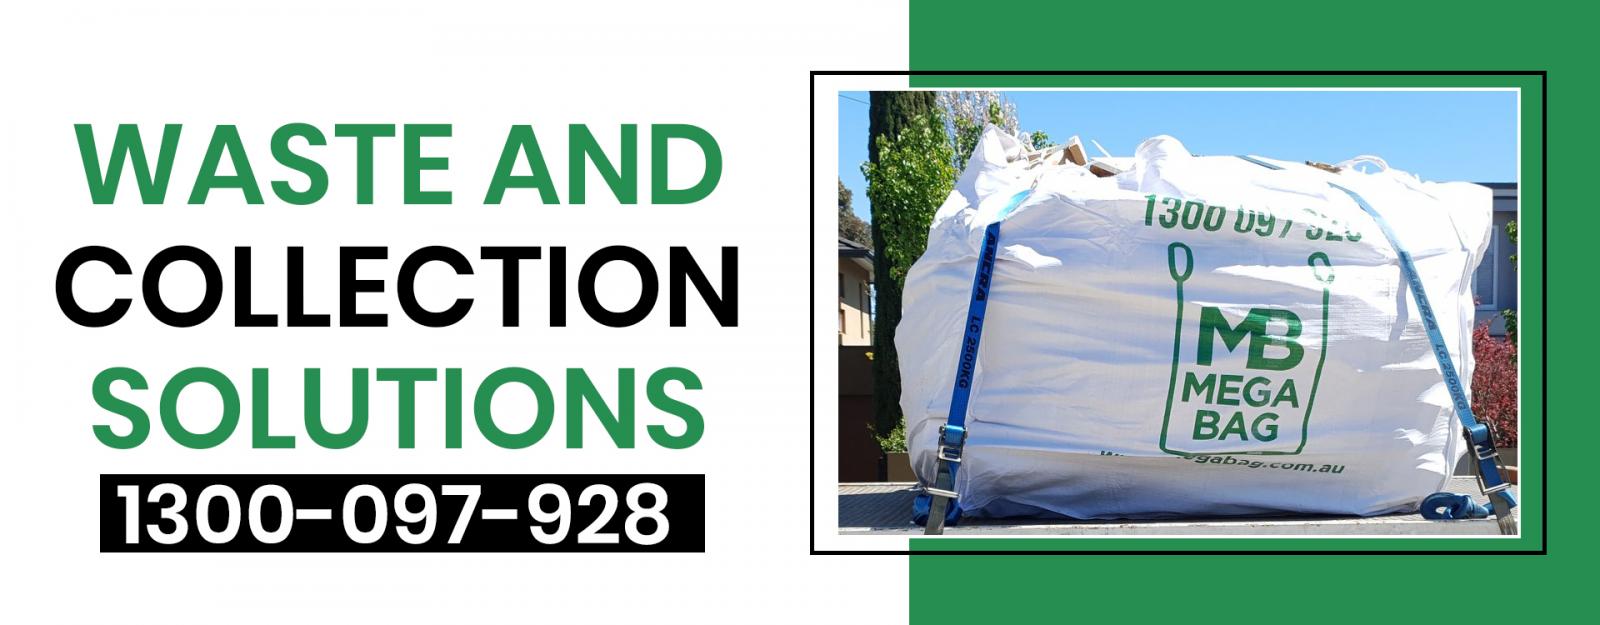 Hire jumbo sized rubbish bags in Melbourne | Waste Removal Bags